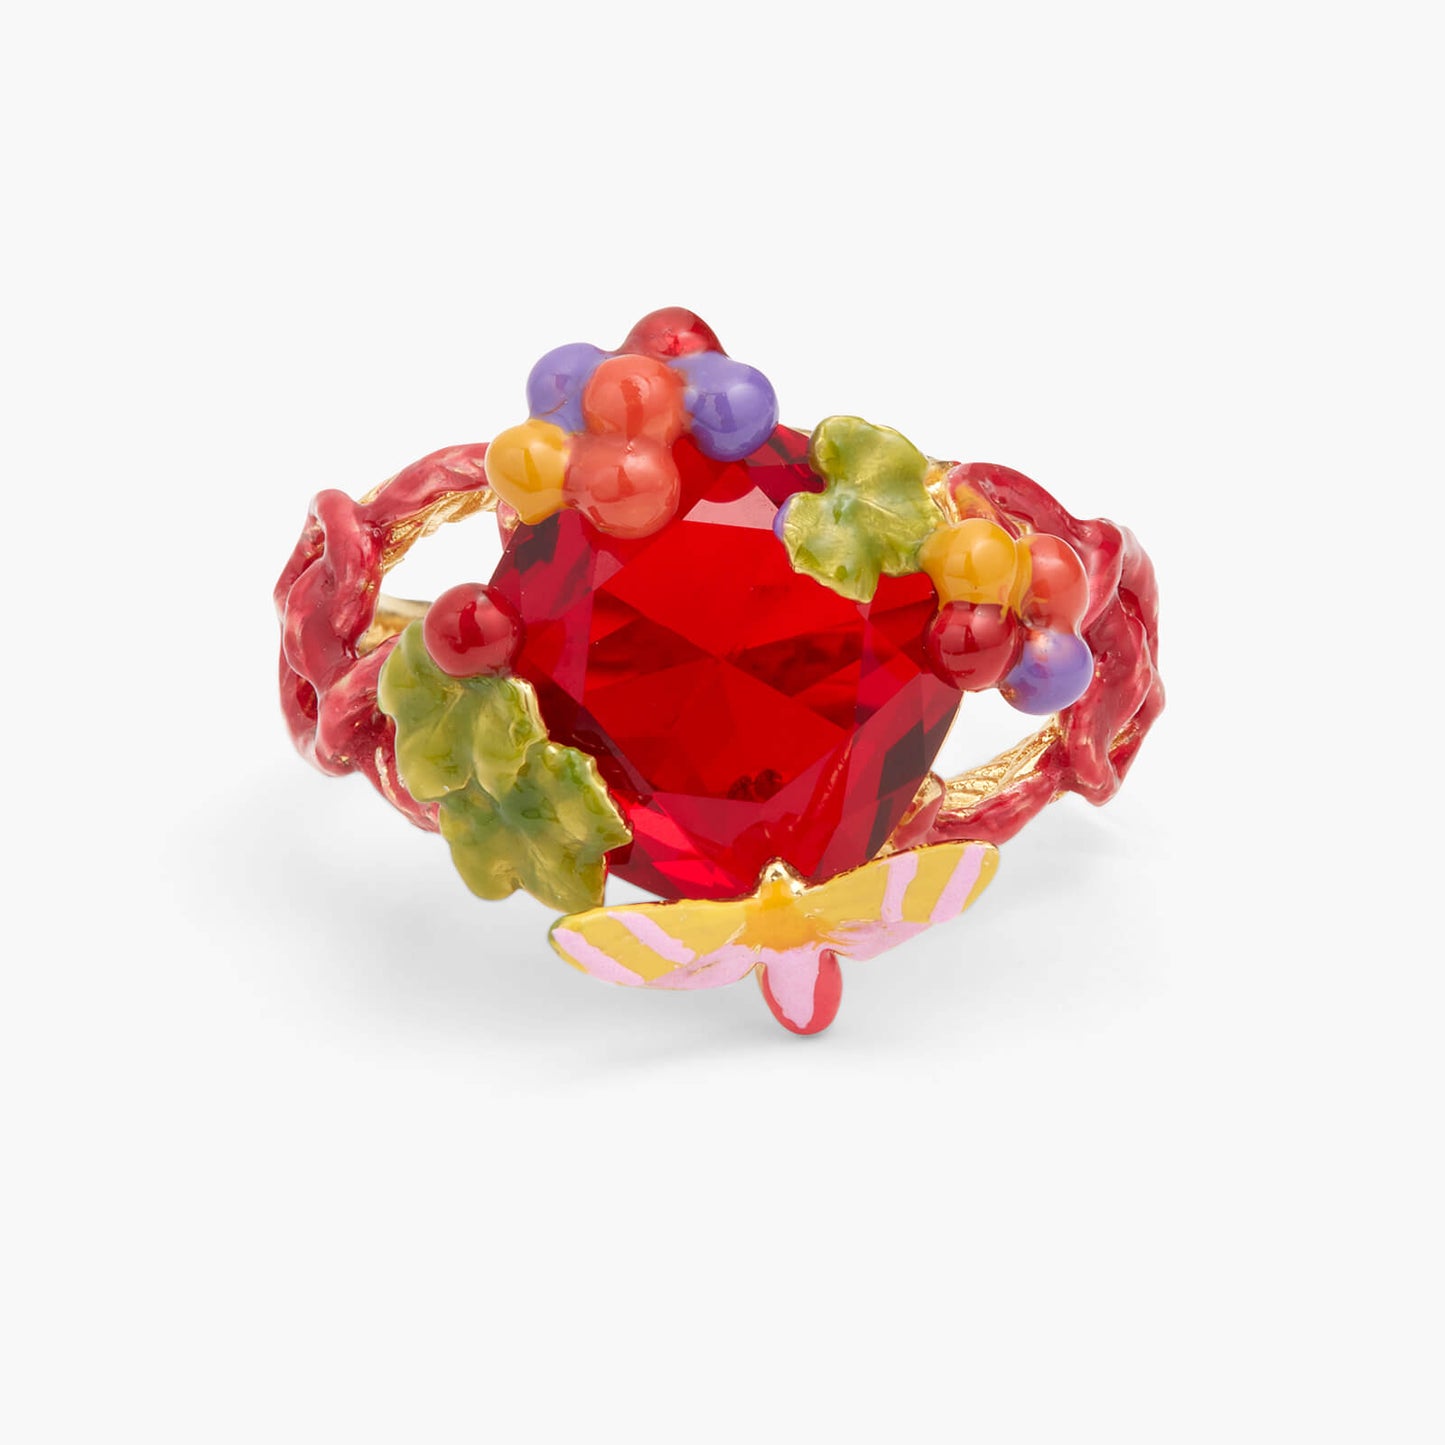 Garnet Red Stone And Grapes Cocktail Ring | AQVT6011